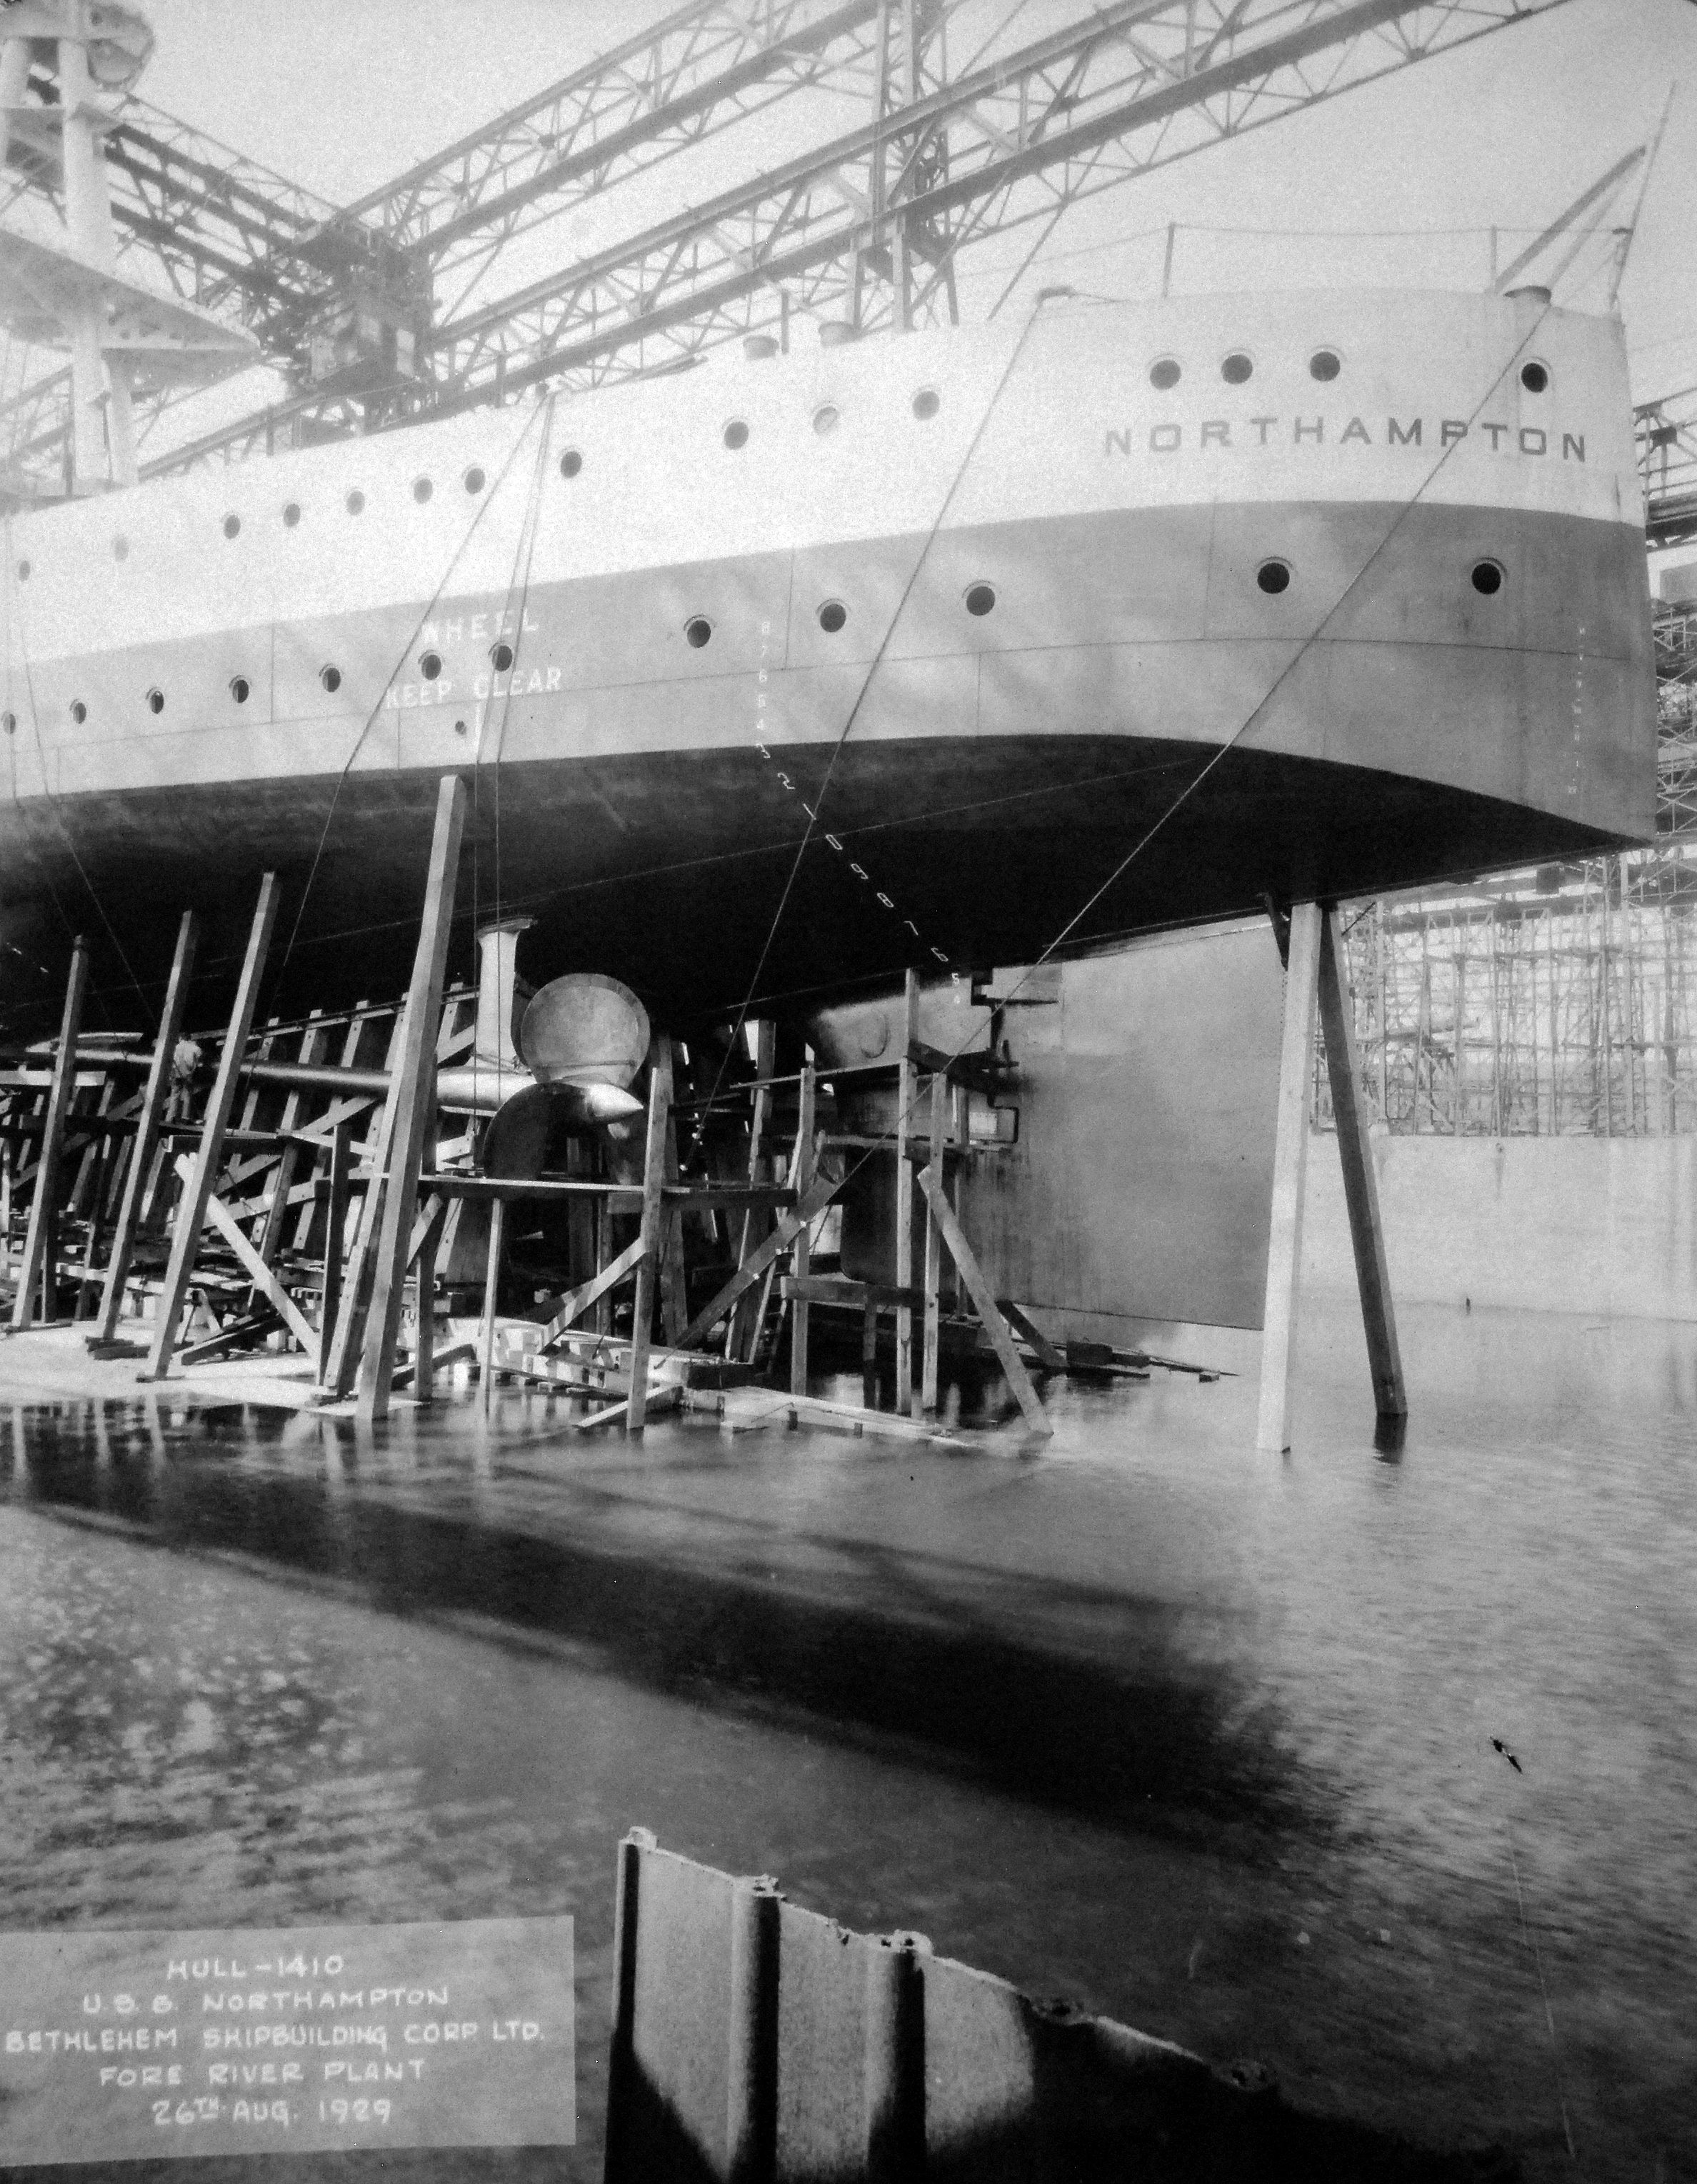 Screws and stern of the cruiser Northampton on the ways ten days before her launching, Bethlehem Steel Fore River Shipyard in Quincy, Massachusetts, United States, 26 Aug 1929. Note the man standing on the scaffold next to the propeller shaft.